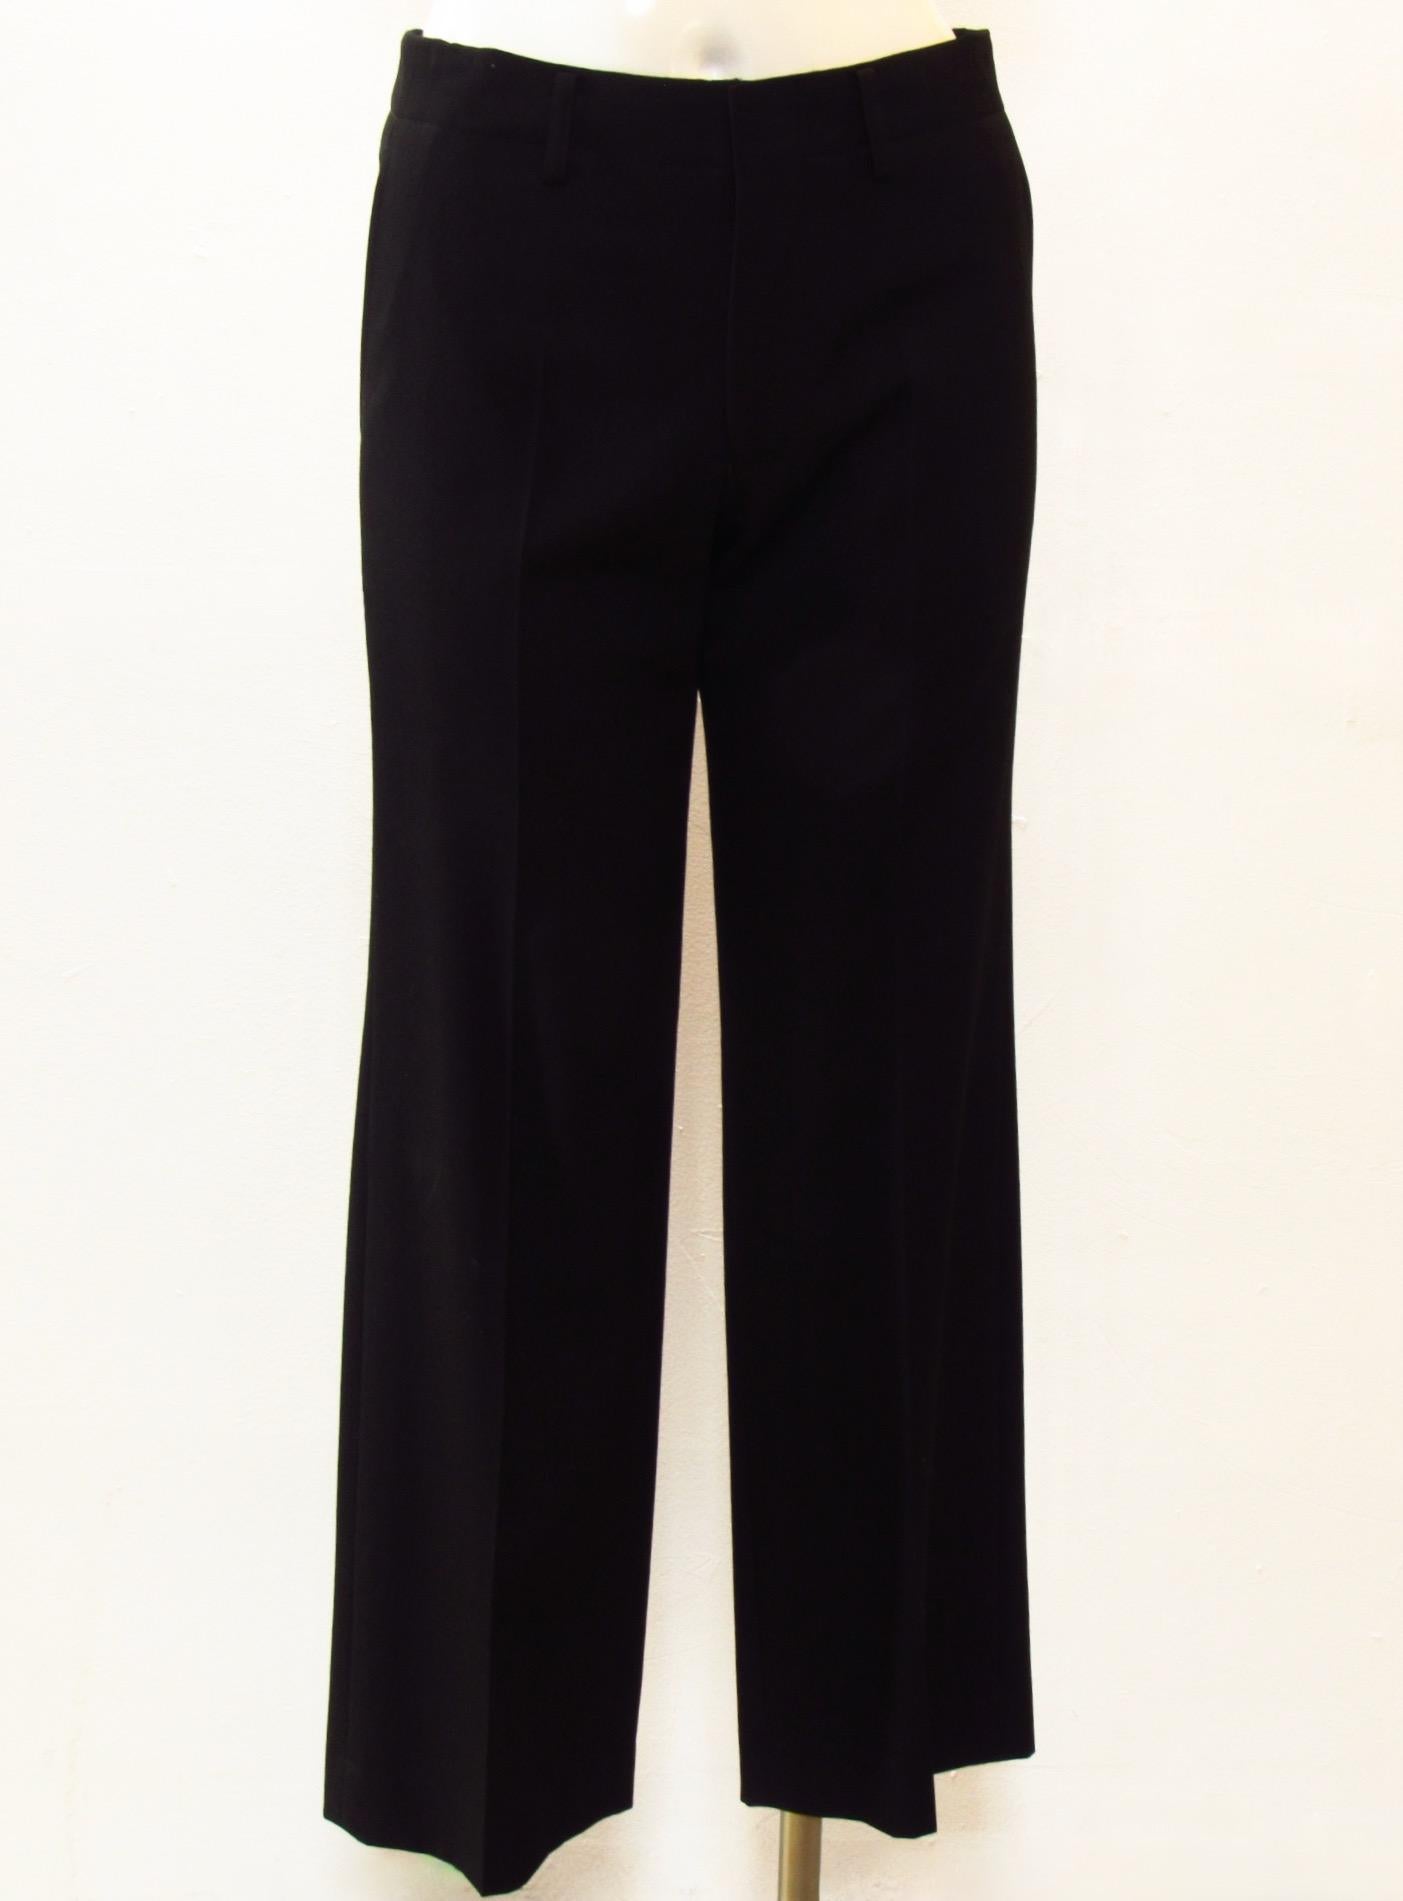 Classic black pants from vintage Junya Watanabe Comme des Garçons are 100% wool with front and back pockets and zip fly.